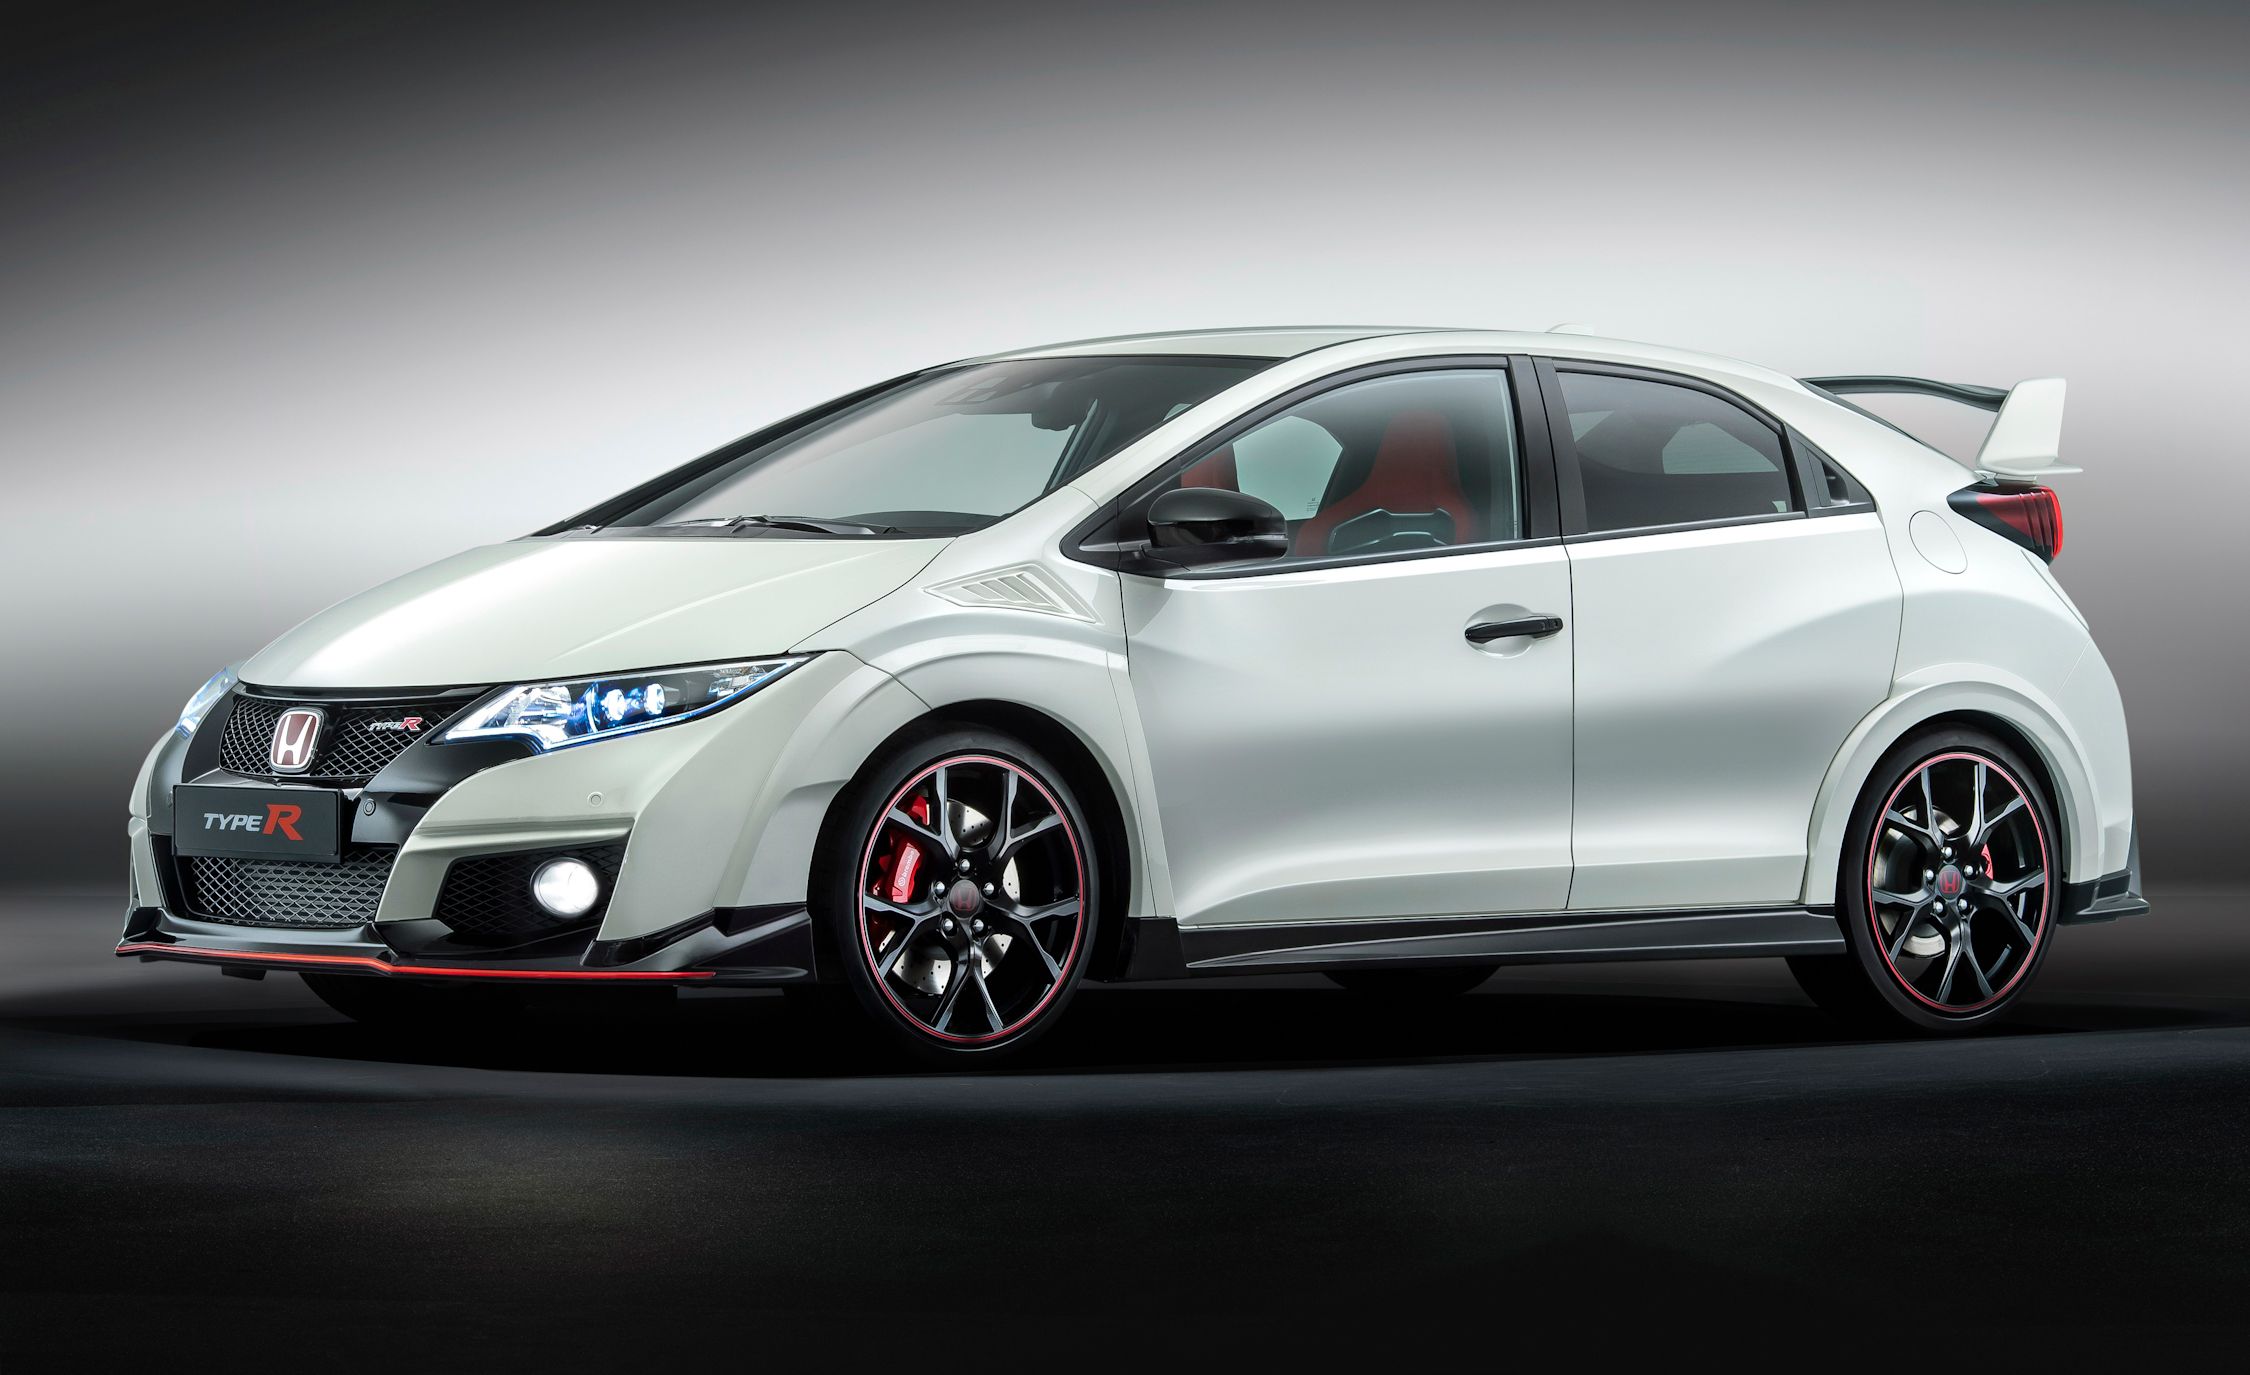 2018 Honda Civic Type R review: ratings, specs, photos, price and more -  CNET